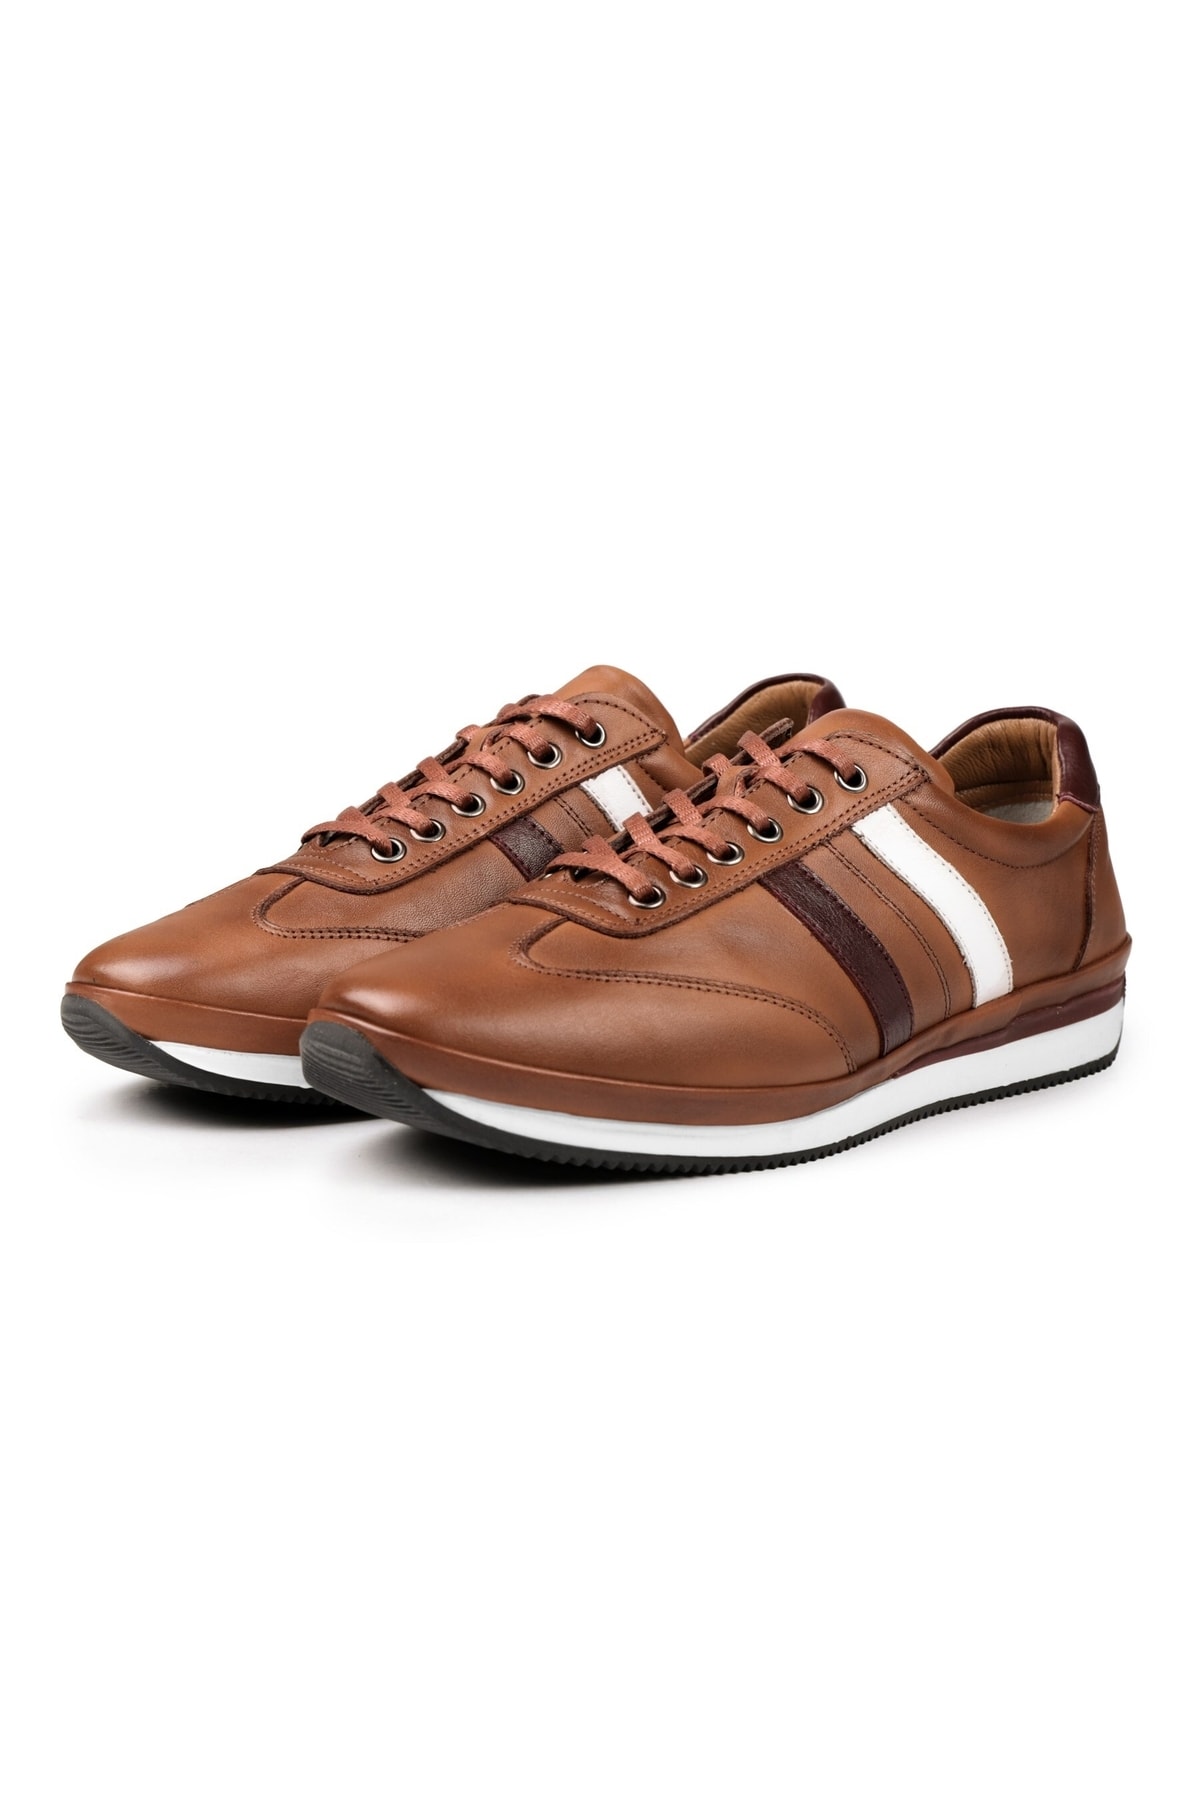 Ducavelli Dynamic Genuine Leather Men's Casual Shoes, 100% Leather Shoes, All Seasons Shoes.